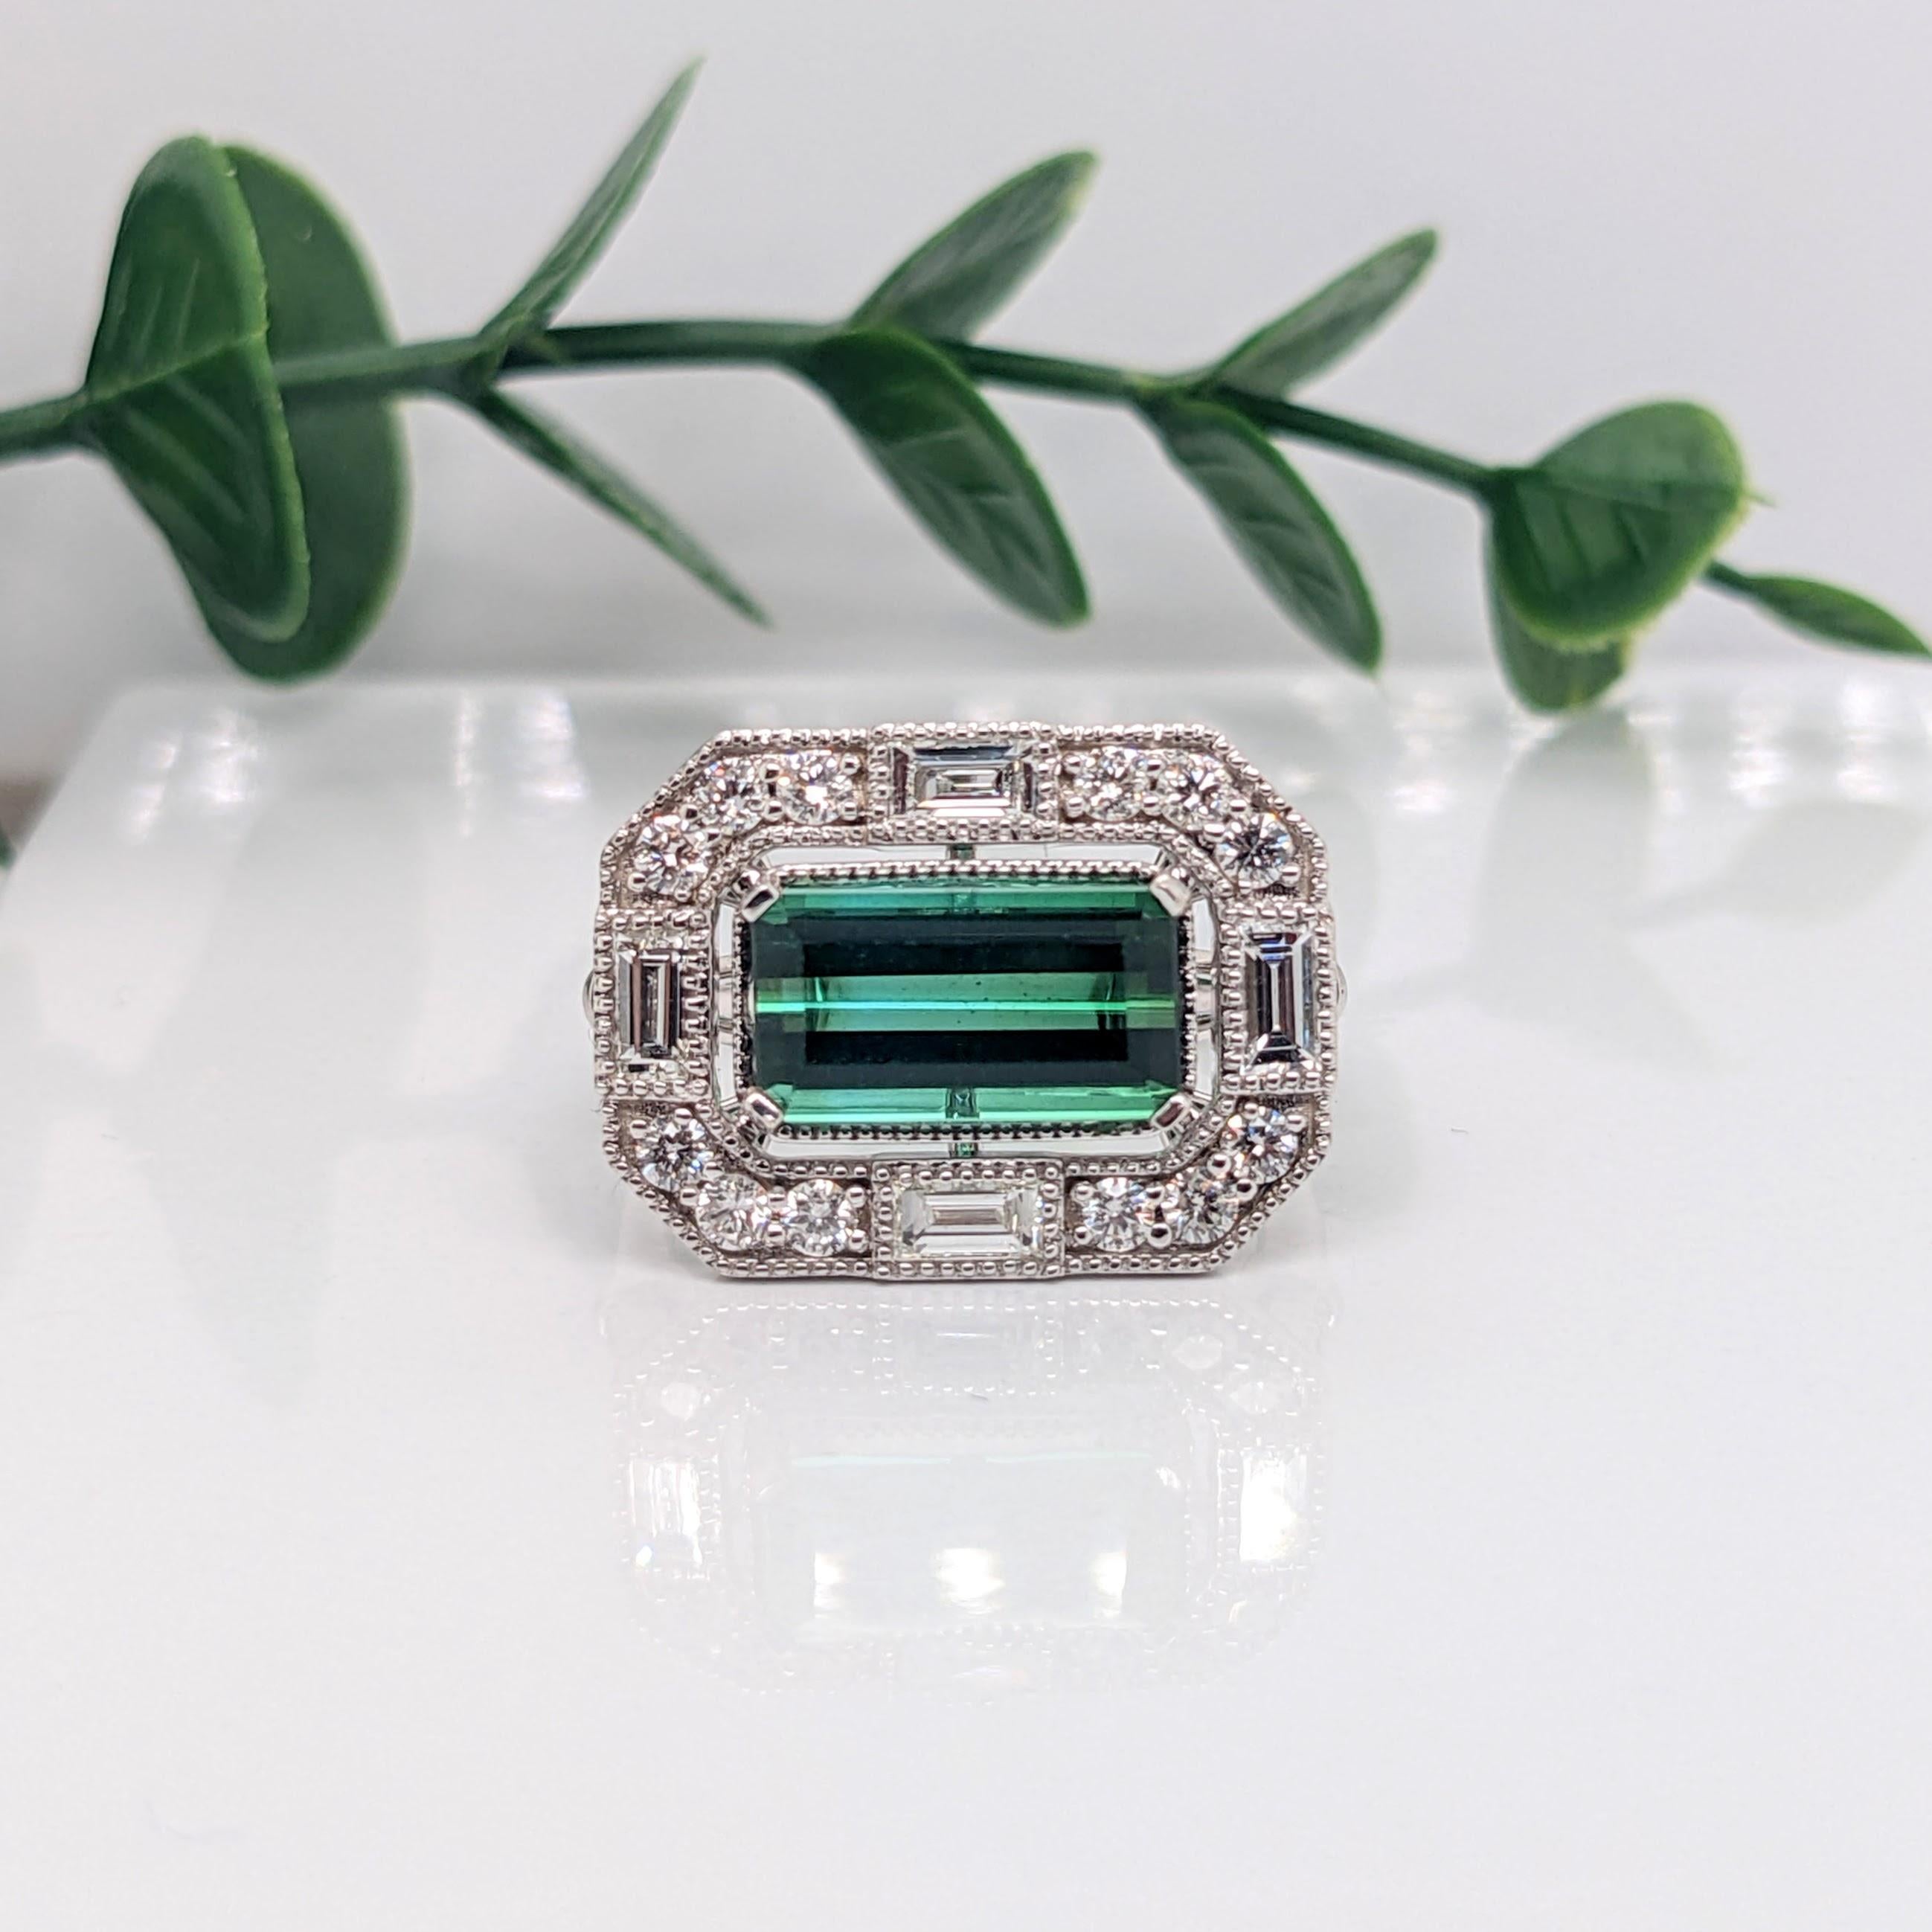 A vivid green Chrome Tourmaline looks exquisite in this Art Deco engagement/statement ring with features of fine Milgrain detailing, a mixed baguette and round diamond halo on east west basket and an embellished pave diamond shank. Chrome Tourmaline